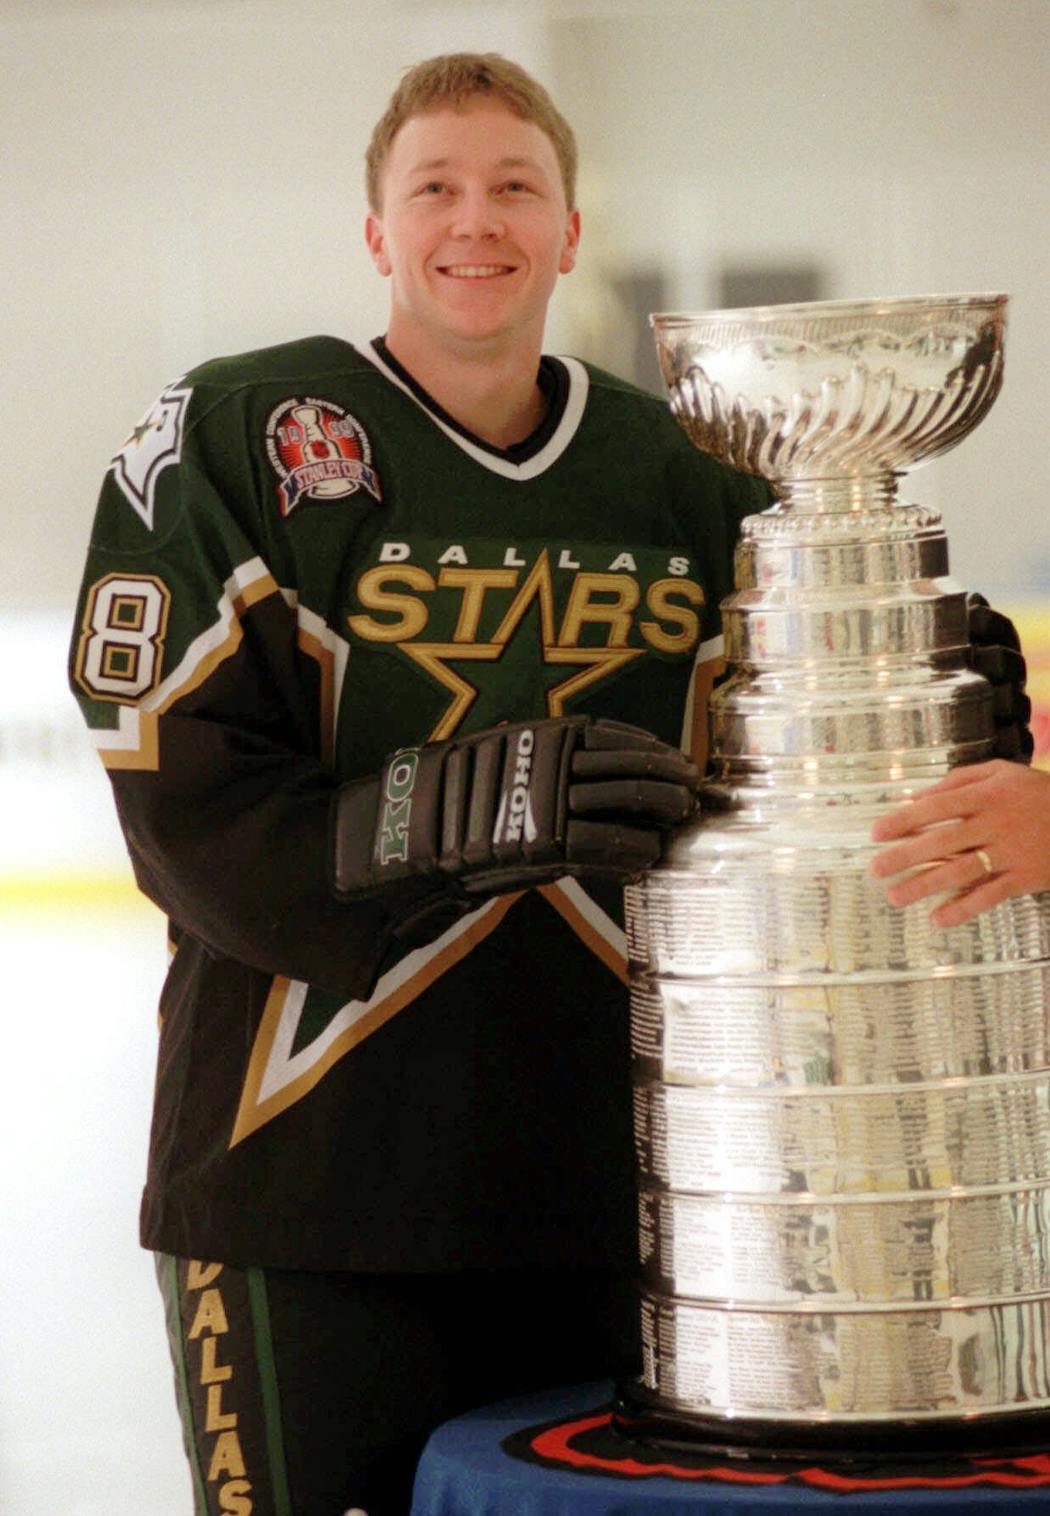 Derek Plante's eight-year NHL playing career included winning a Stanley Cup with Dallas in 1999. Plante is now back in the league as an assistant coach in Chicago.